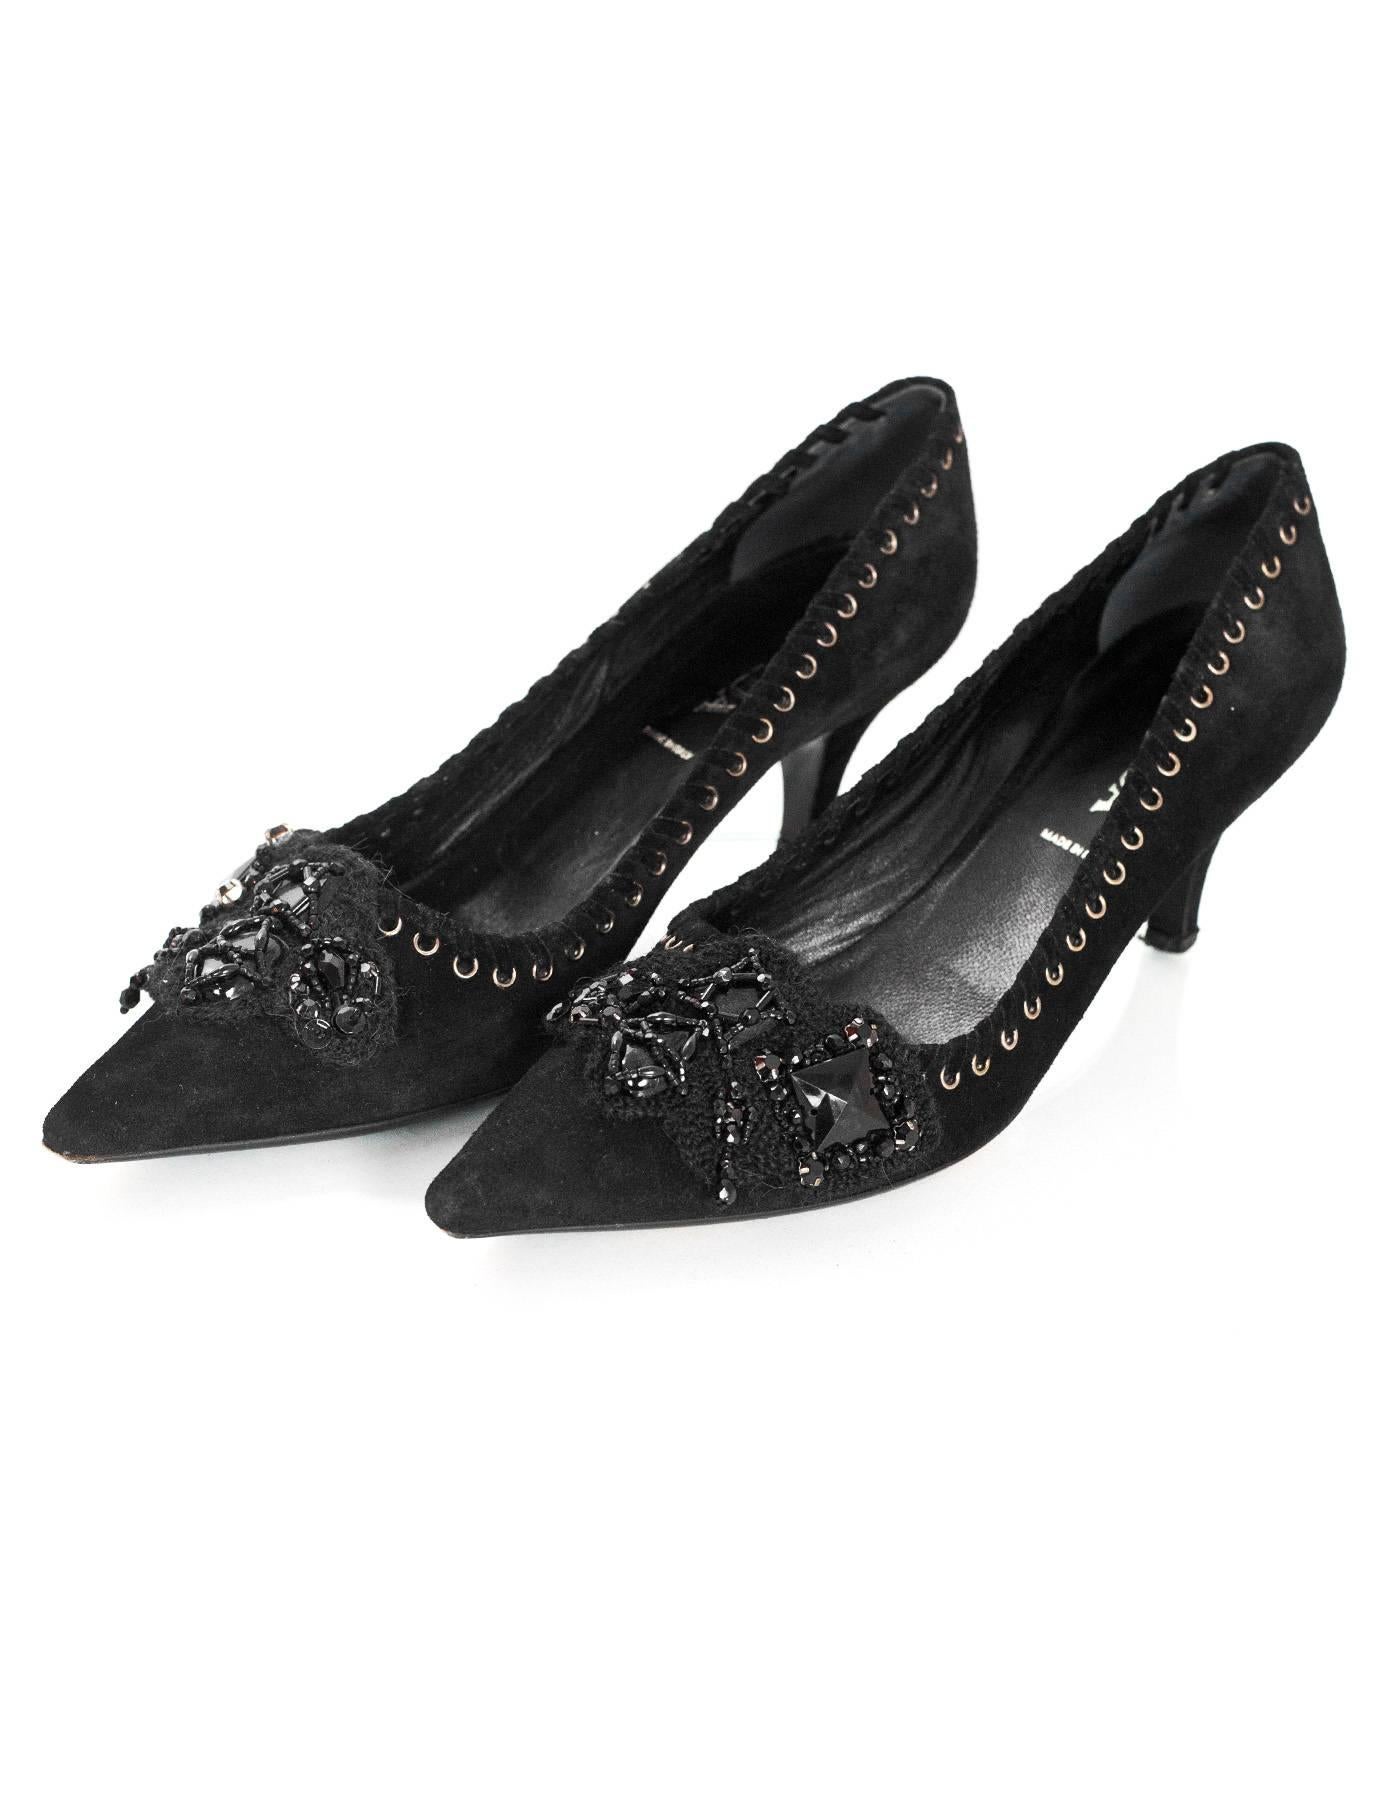 Prada Black Suede & Beaded Pumps Sz 37.5

Made In: Italy
Color: Black
Materials: Suede, beads
Closure/Opening: Slide on
Sole Stamp: Prada 37.5 Made in Italy
Overall Condition: Excellent pre-owned condition with the exception of some wear at insoles